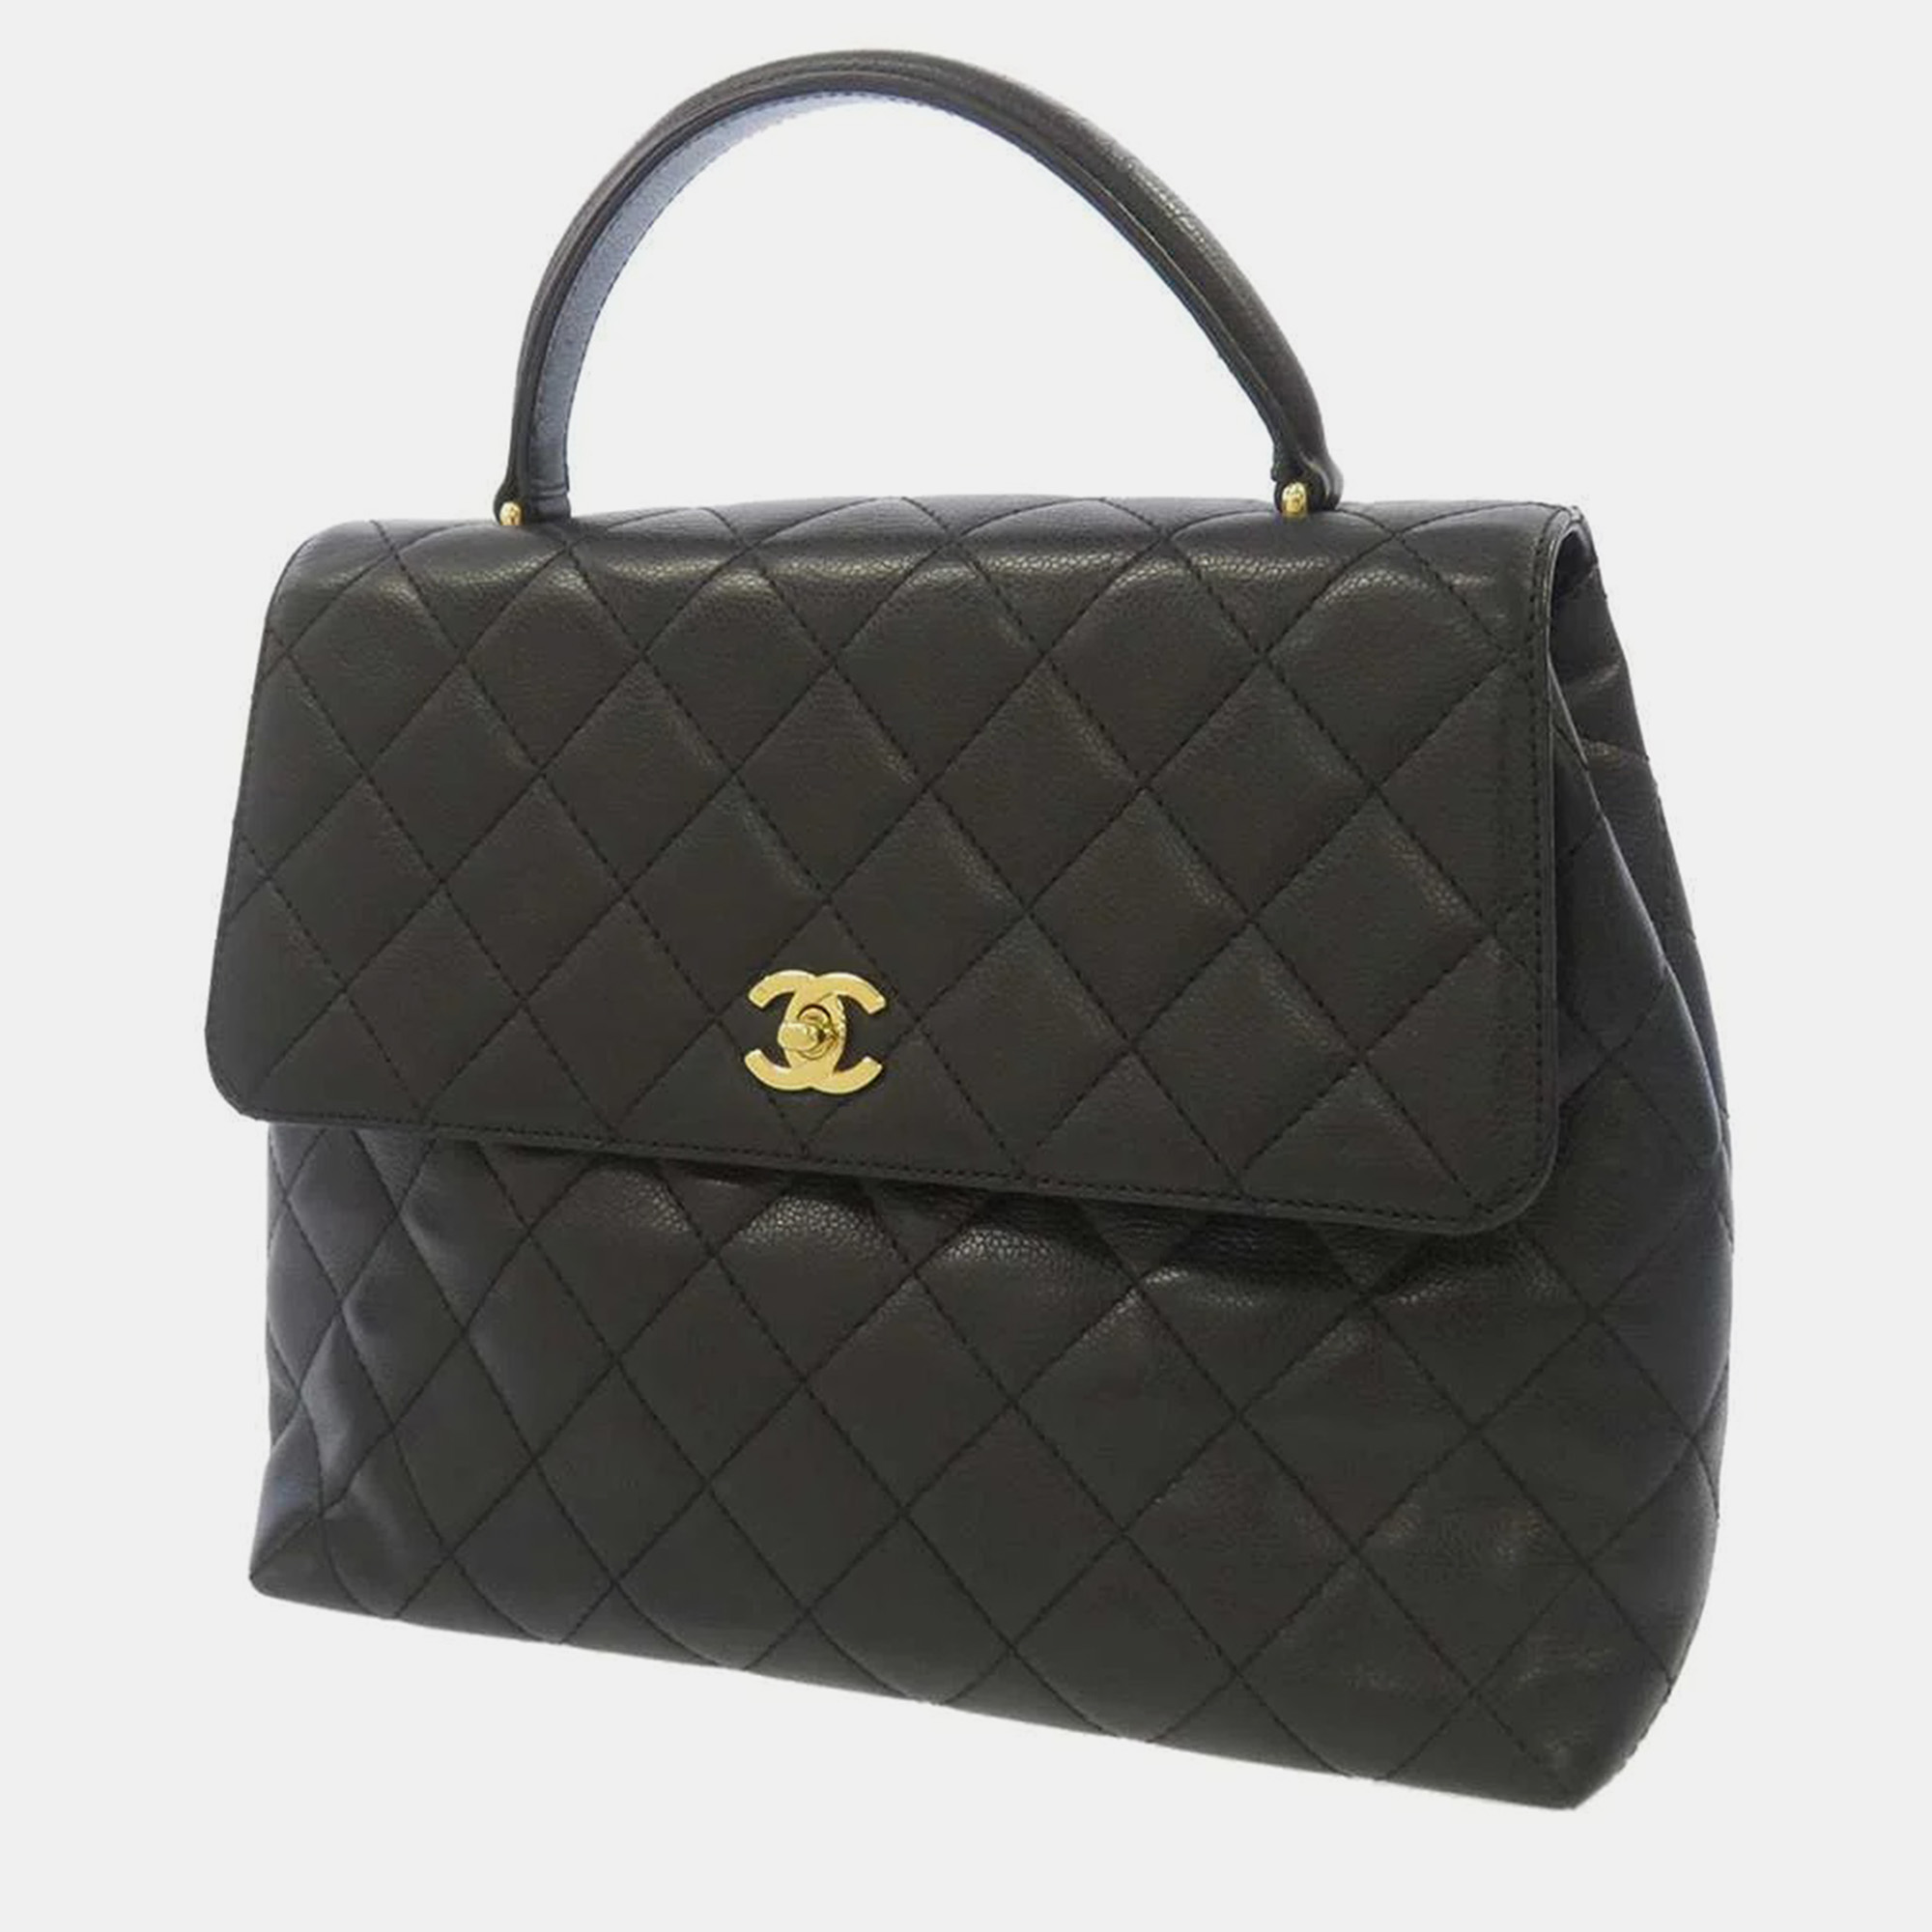 Chanel black leather kelly top handle bag